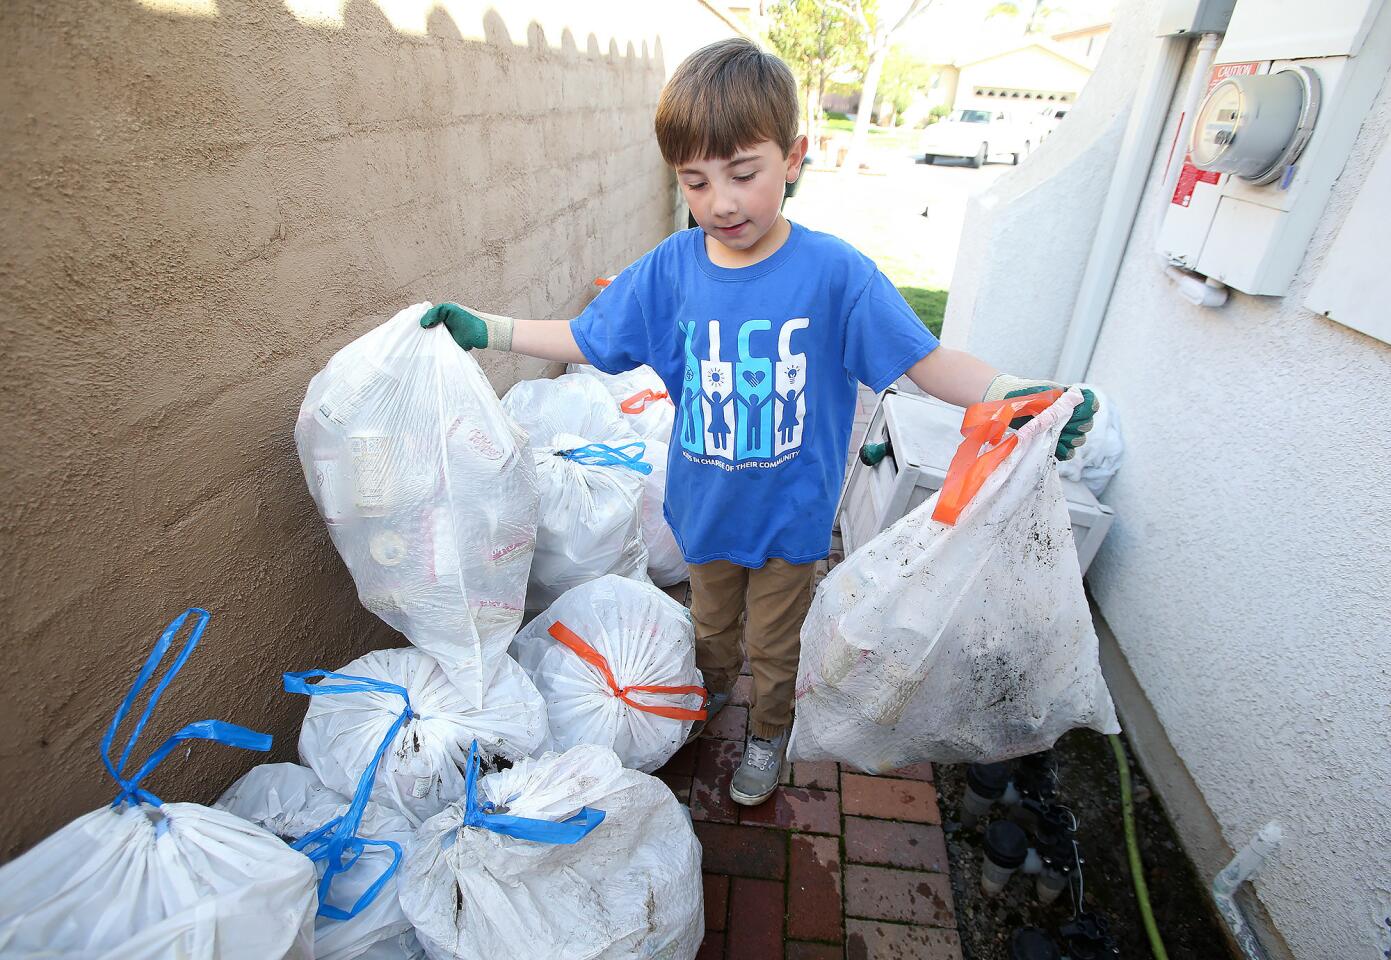 Ryan Hickman, 9, begins the task of sorting cans, glass and plastic bottles for his company, Ryan's Recycling, at his home in San Juan Capistrano. He has donated more than $8,400 to the Pacific Marine Mammal Center in Laguna Beach.